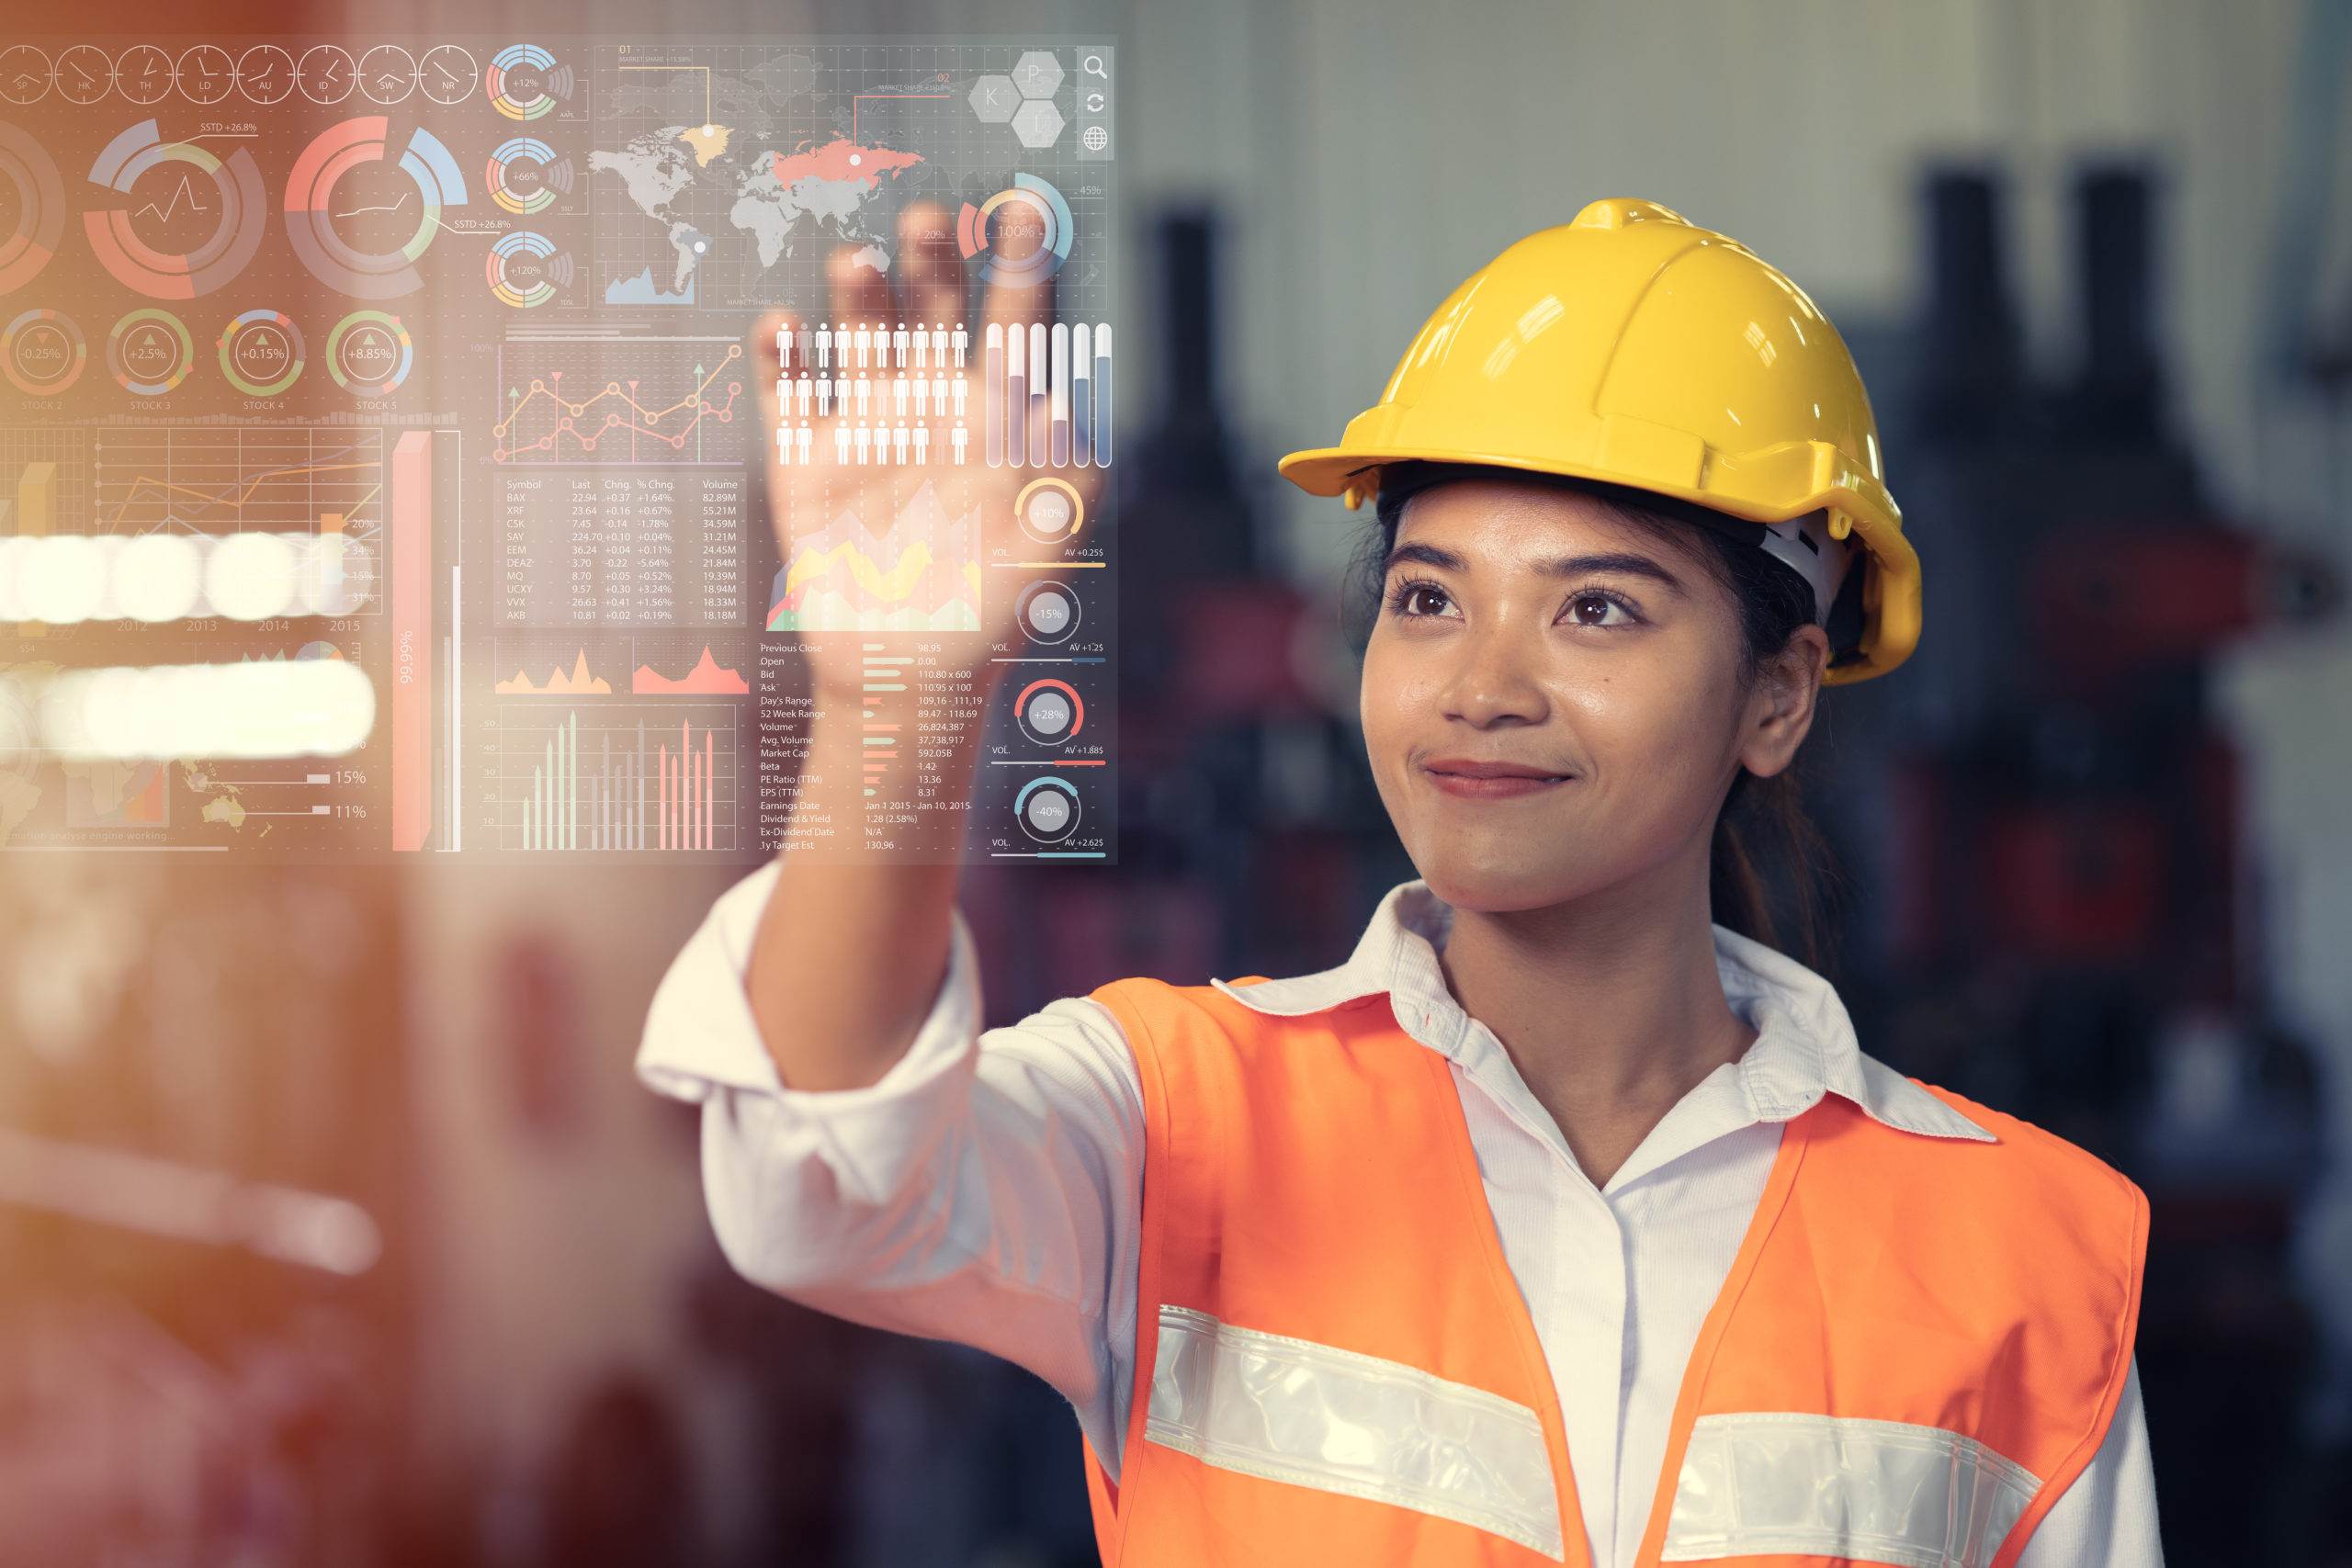 The Future of Work in Light Industrial: Embracing Industry 4.0